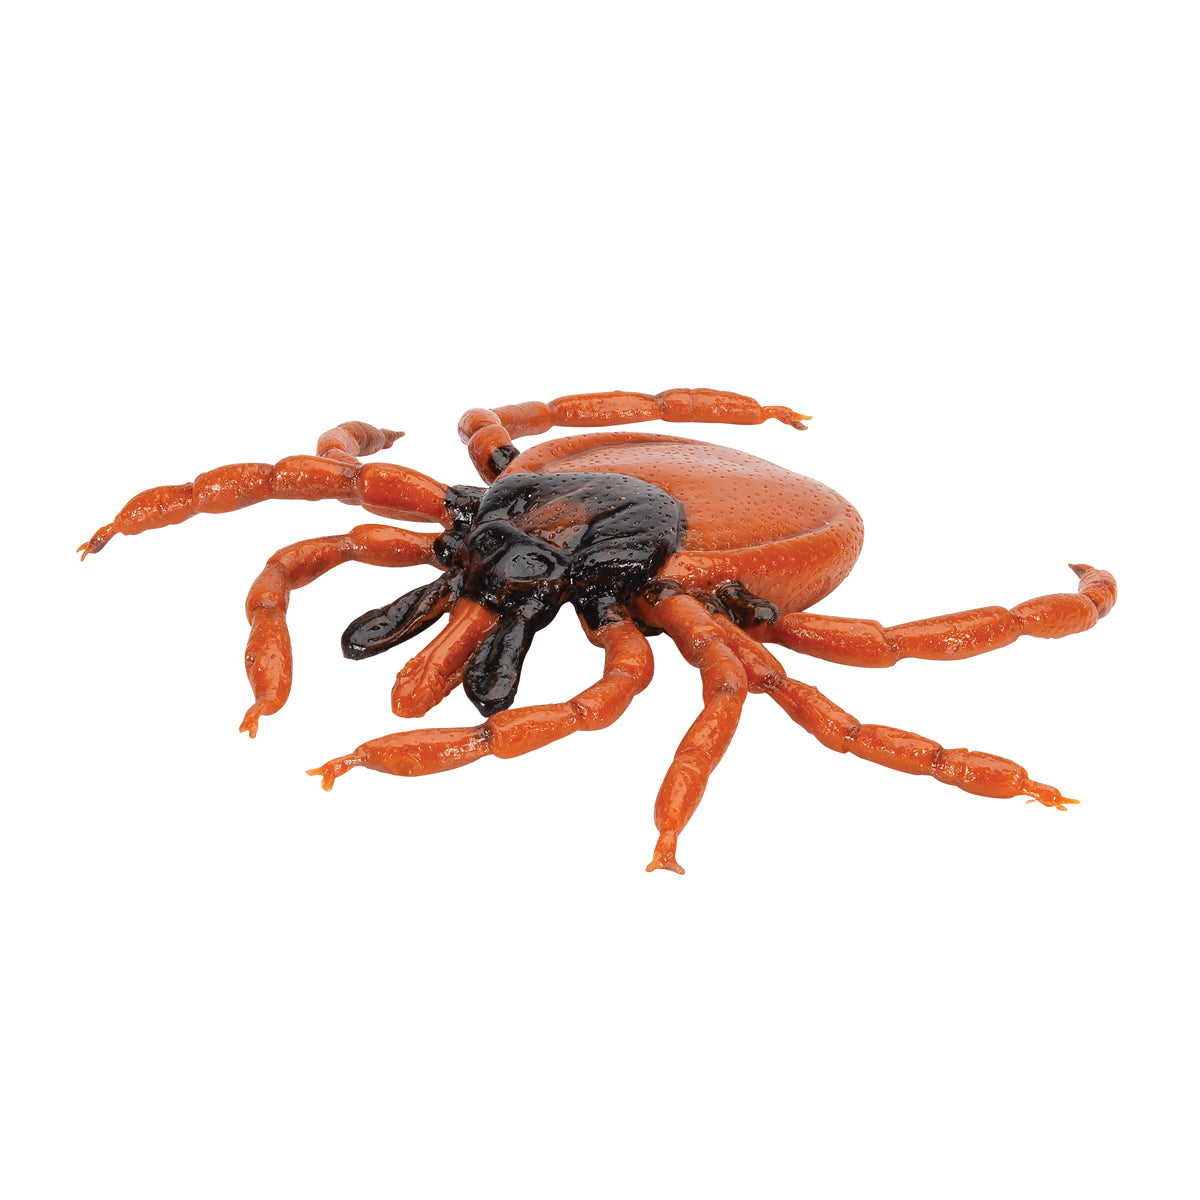 Model of a tick (Ixodes ricinus) which has been enlarged